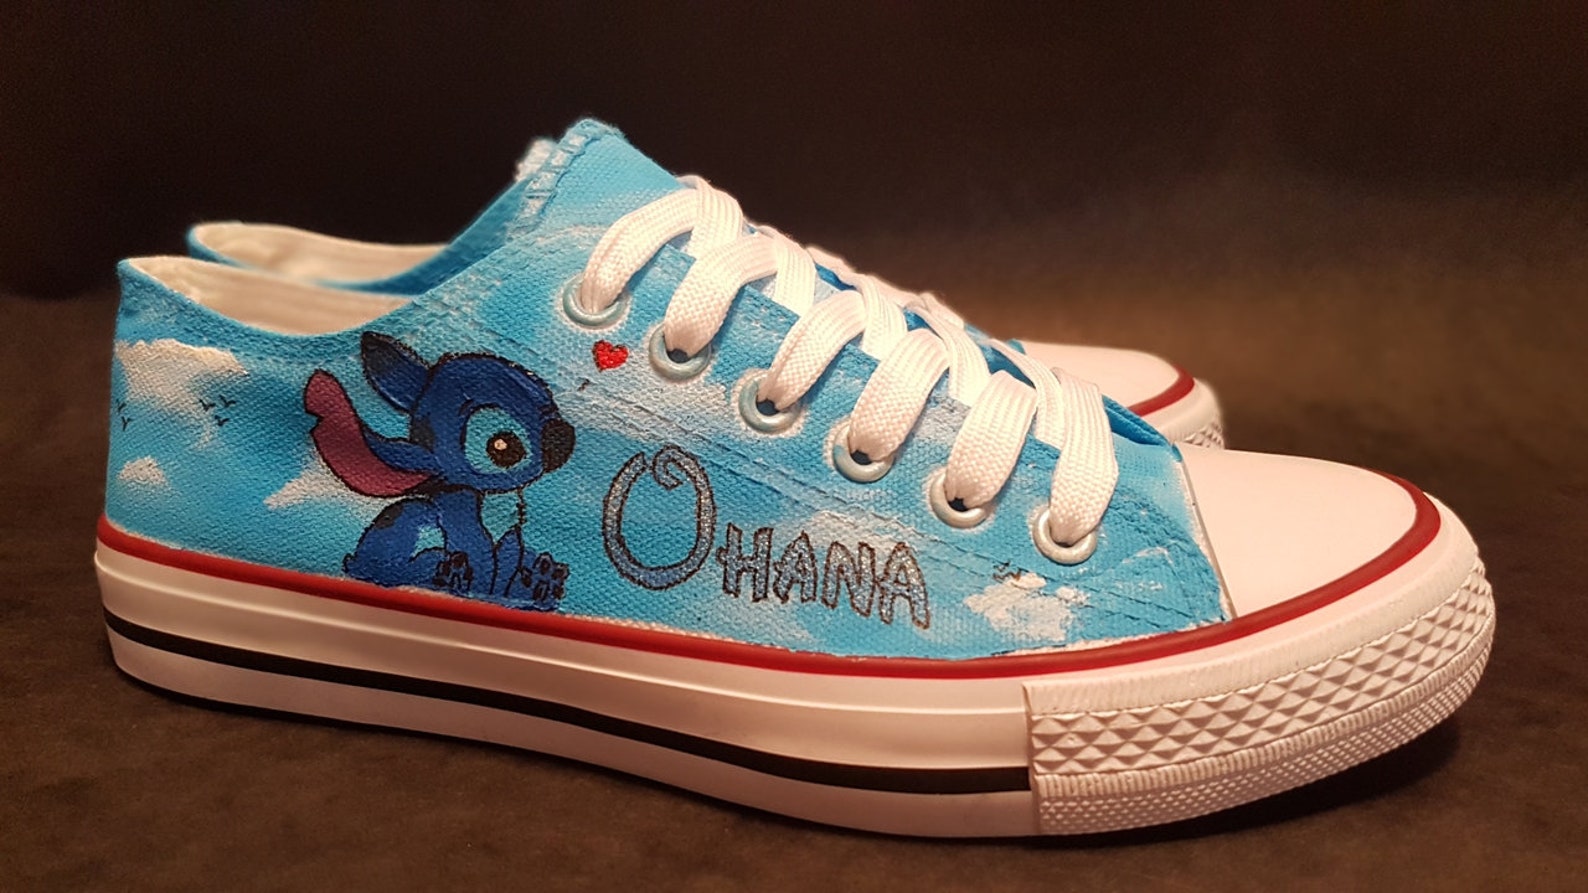 Custom Hand Painted Shoes Disney Stitch Character Art Graphic | Etsy